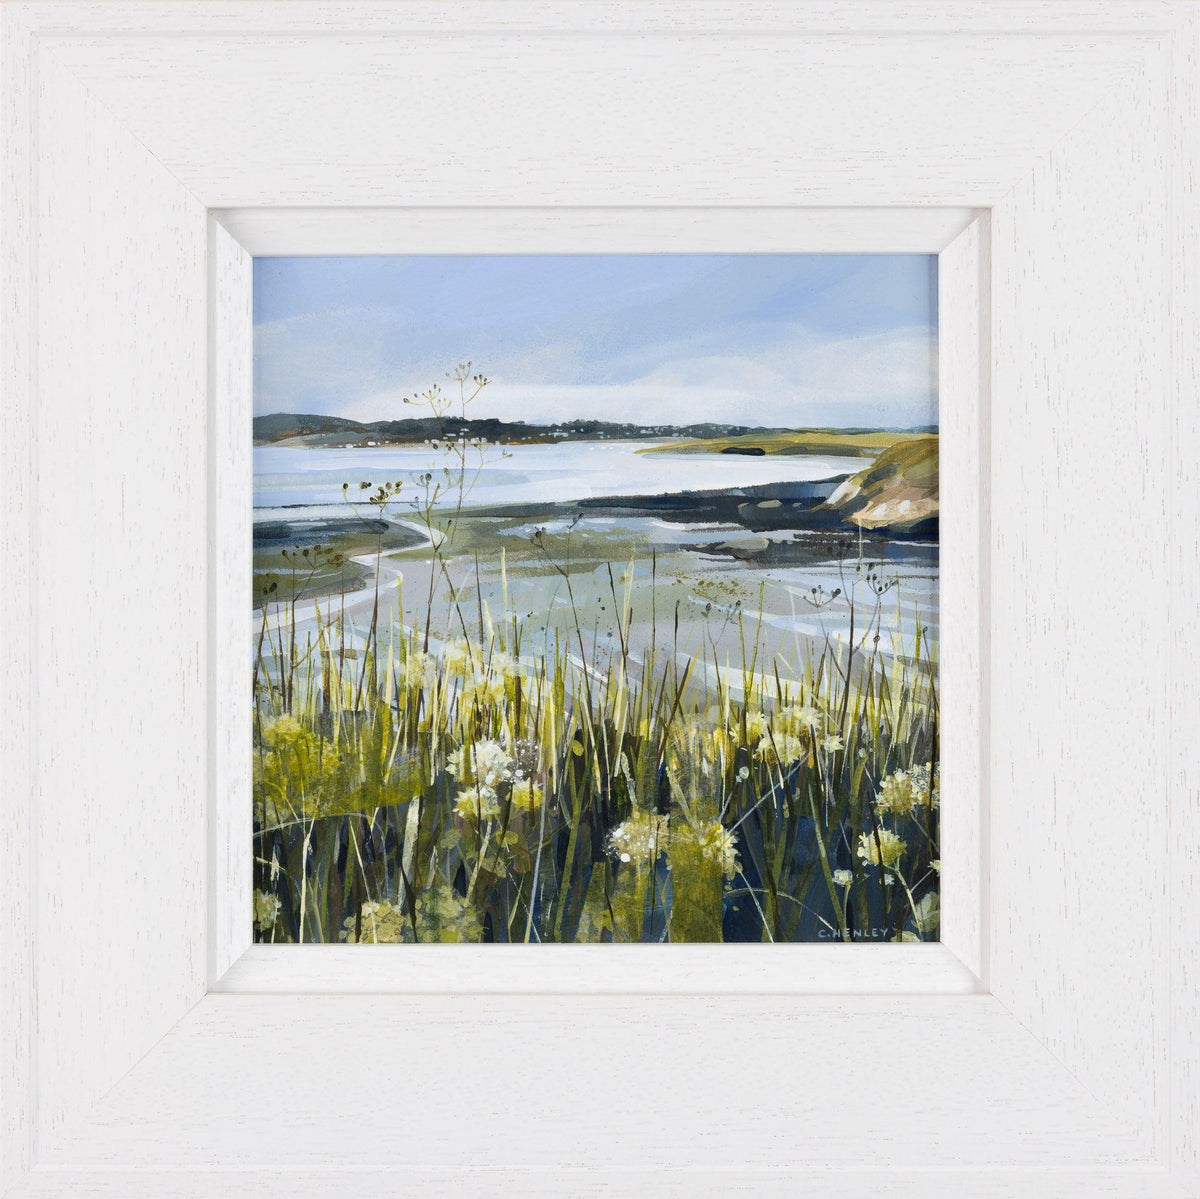 &#39;Looking Upstream, Camel Estuary&#39; a mixed media original by Claire Henley, available at Padstow Gallery, Cornwall